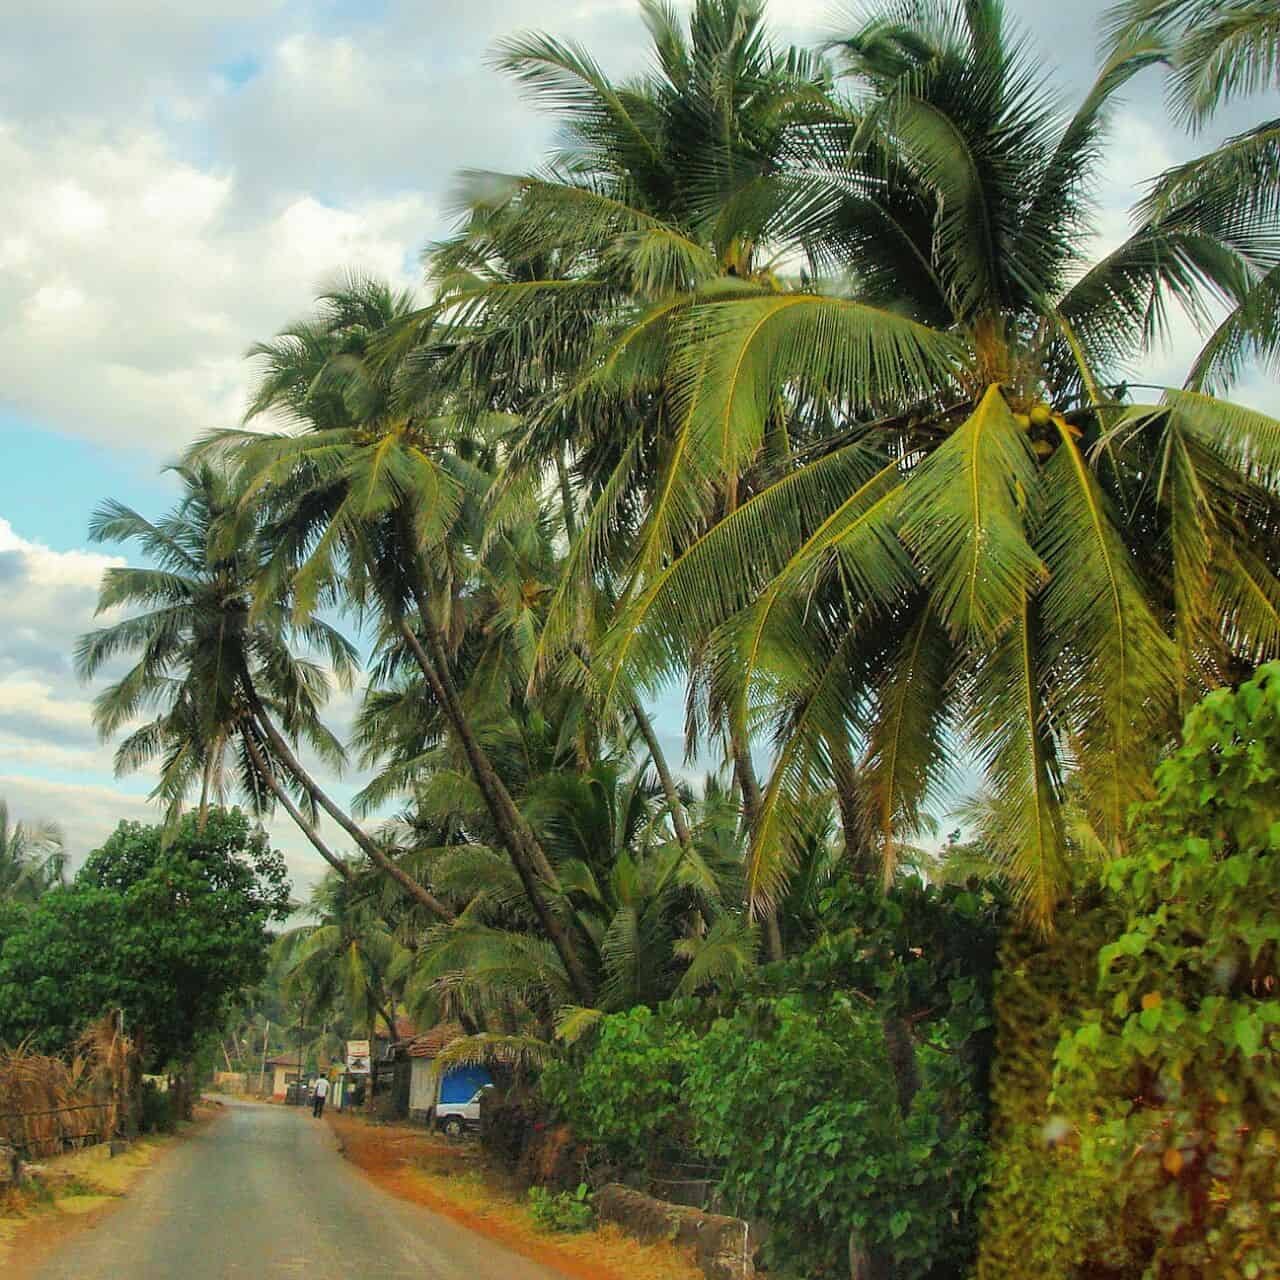 Coconut trees and a narrow road in Konkan